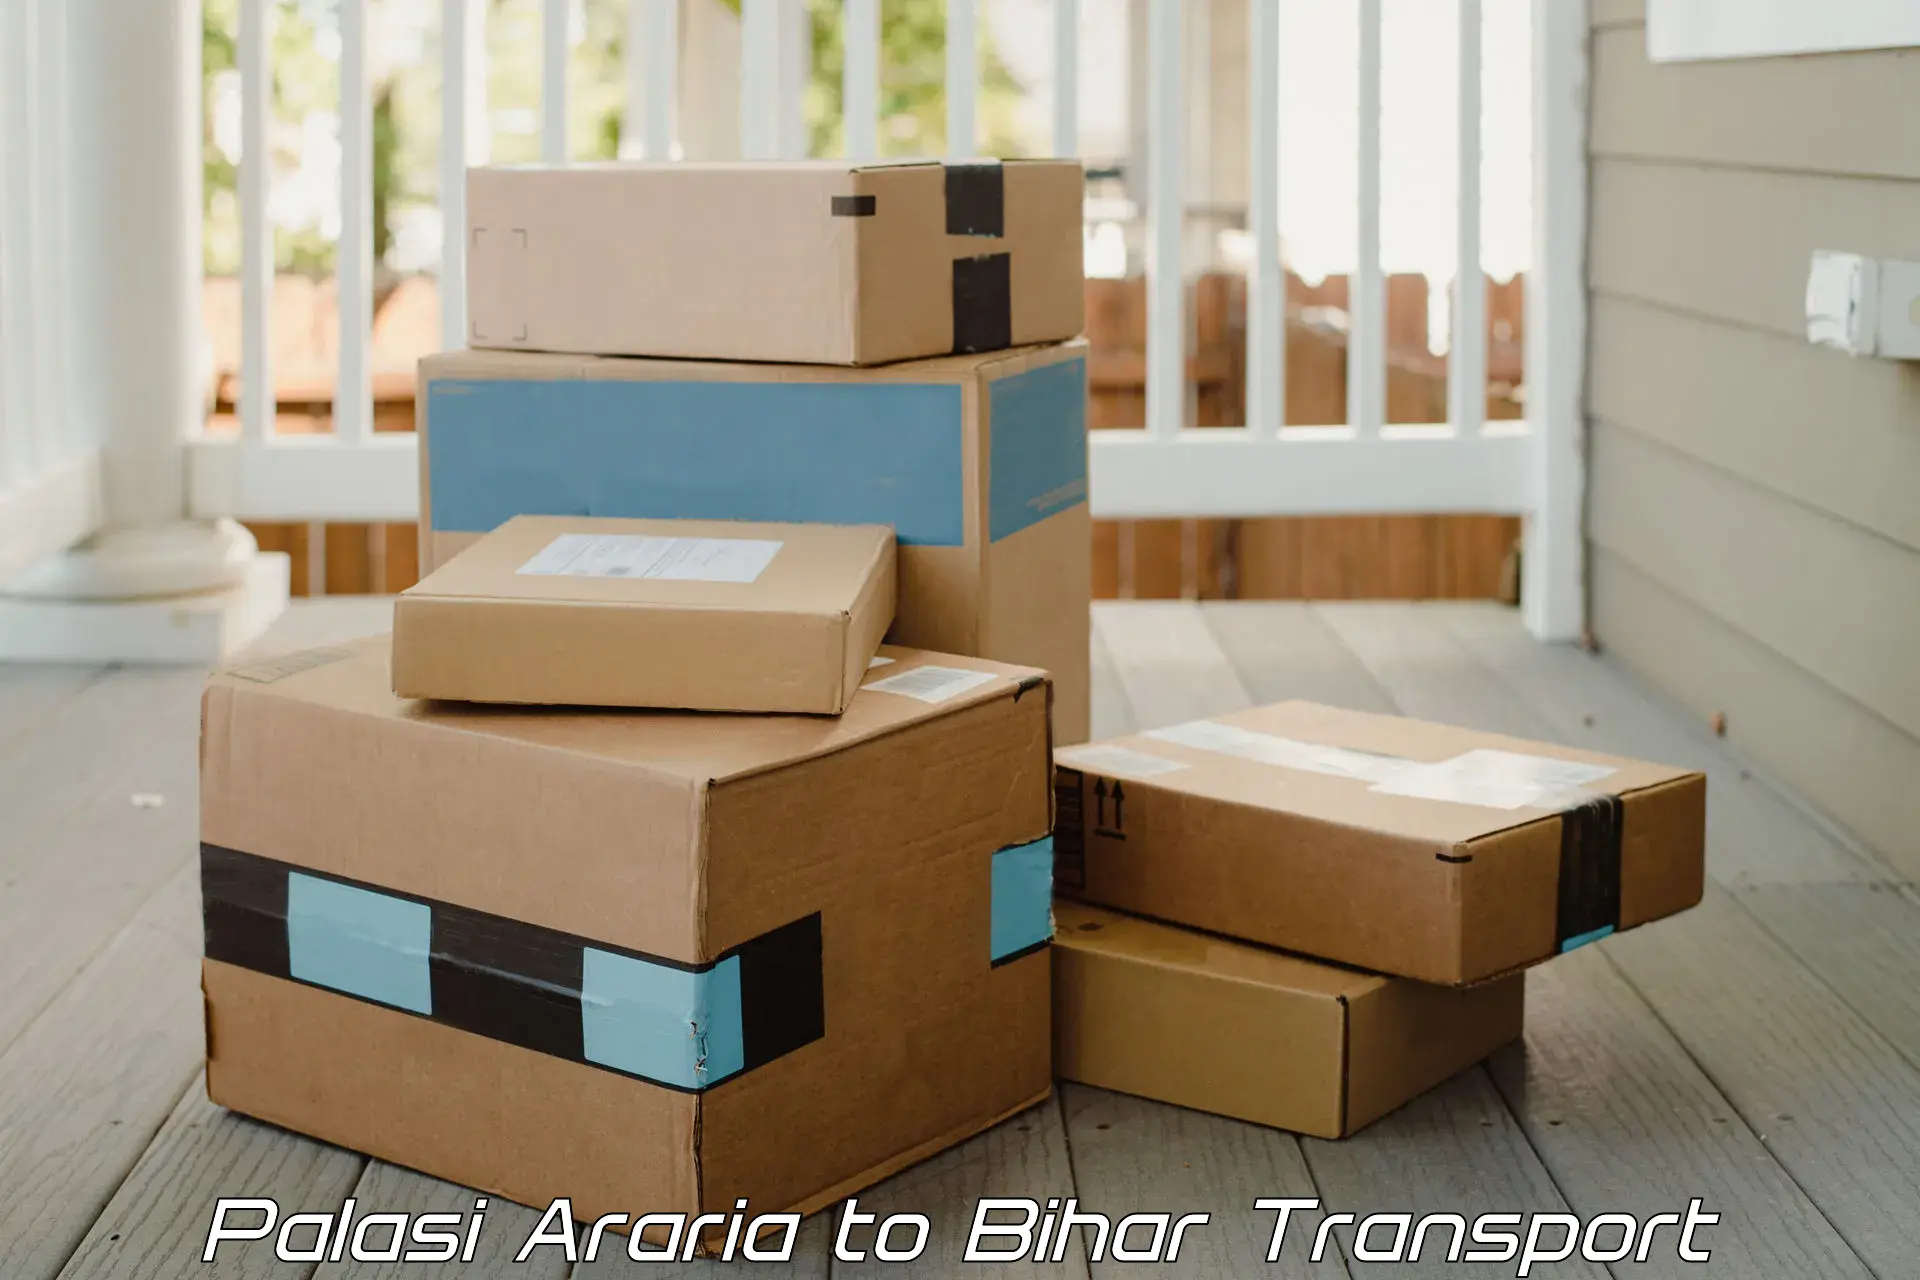 Goods delivery service Palasi Araria to Bihar